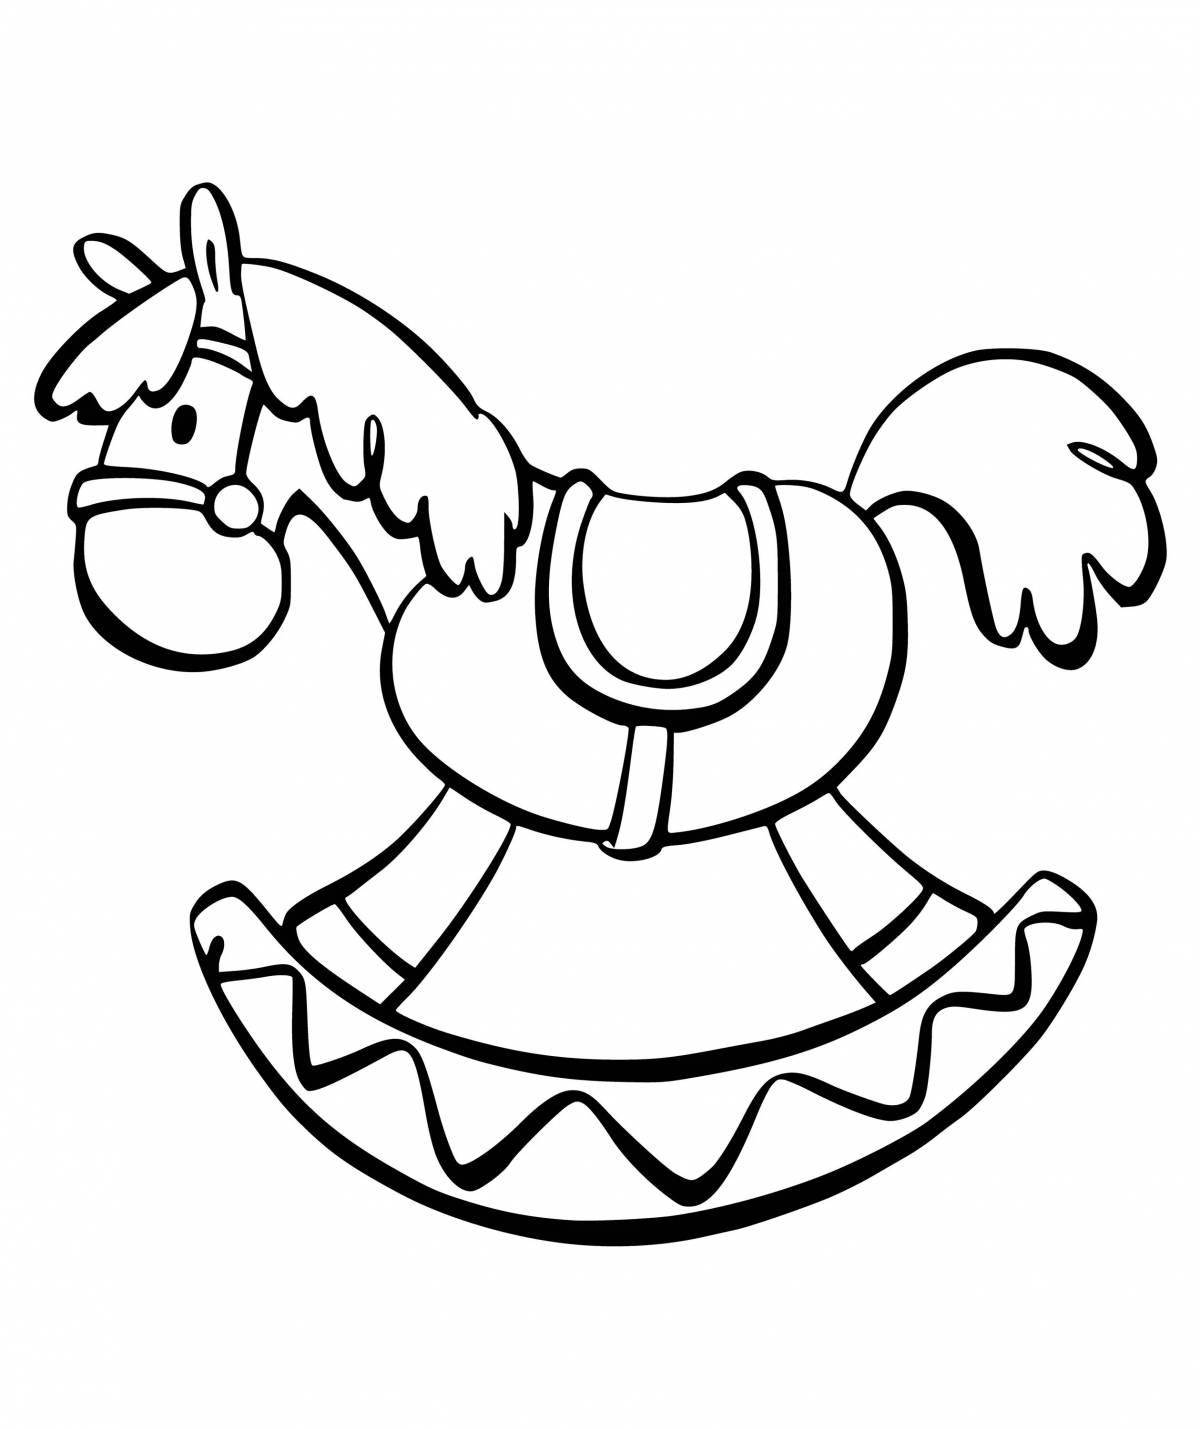 Holiday horse coloring page